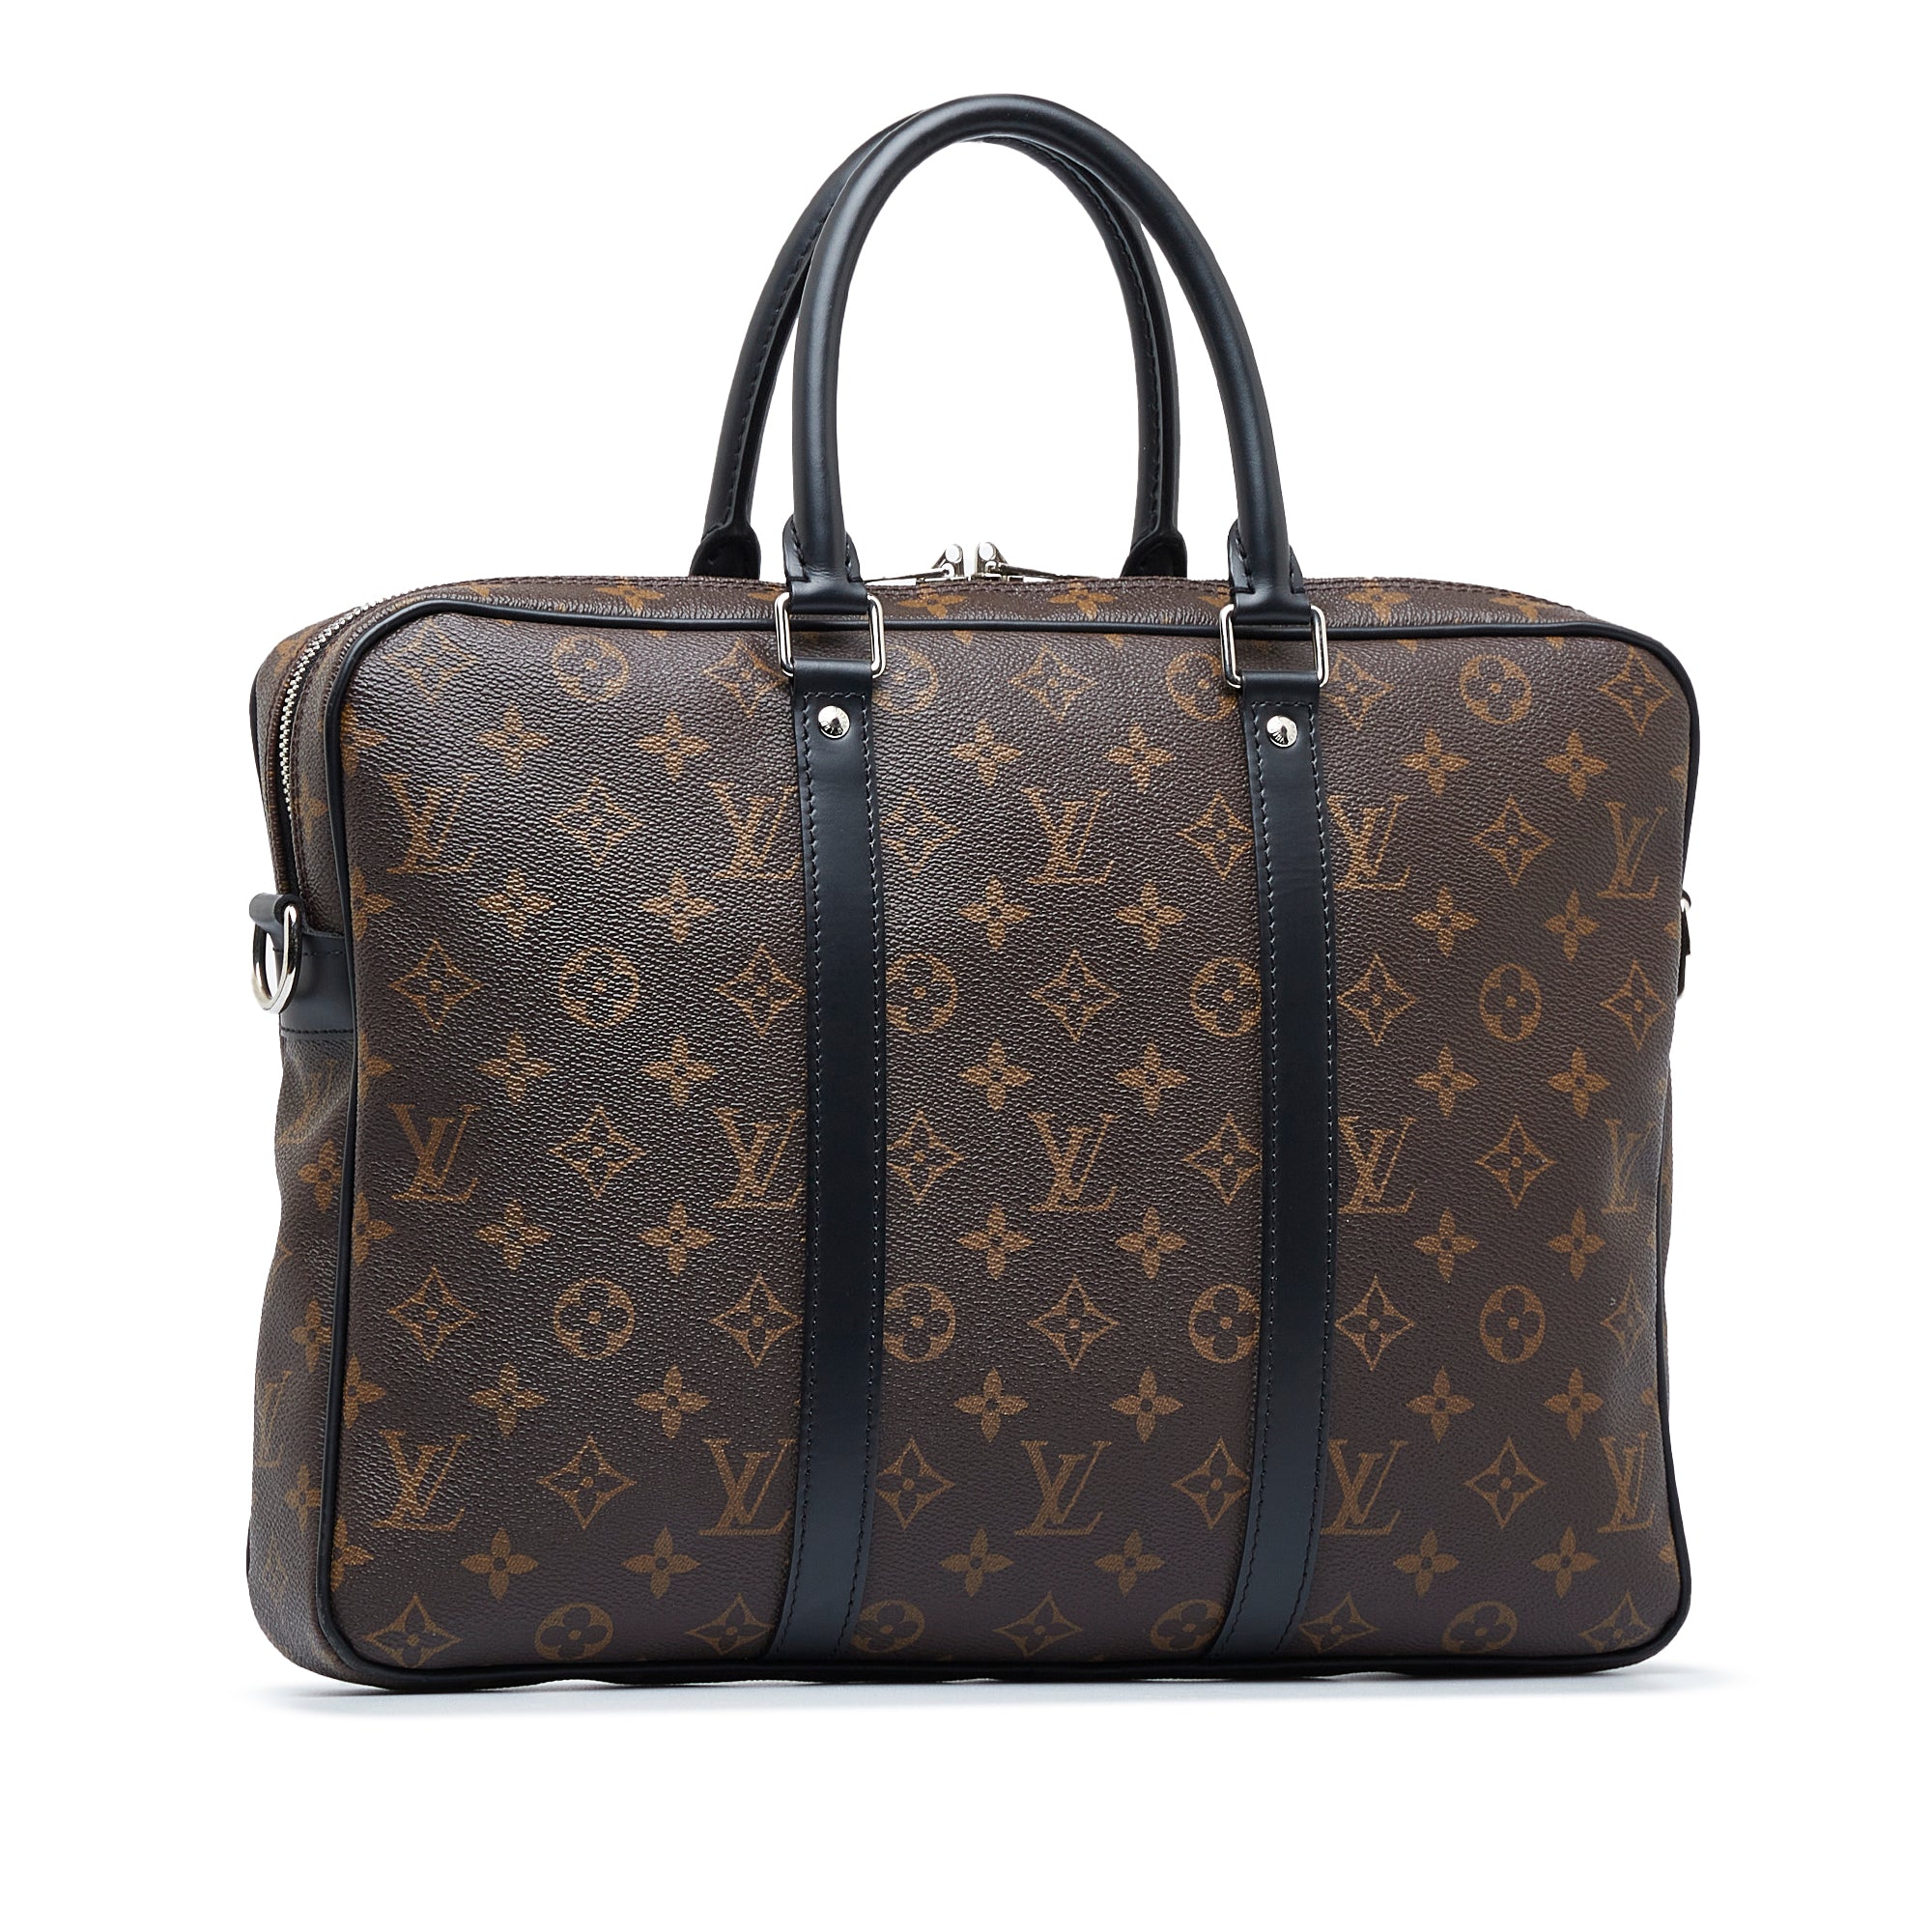 Louis Vuitton - Authenticated Utility Bag - Leather Brown for Men, Very Good Condition